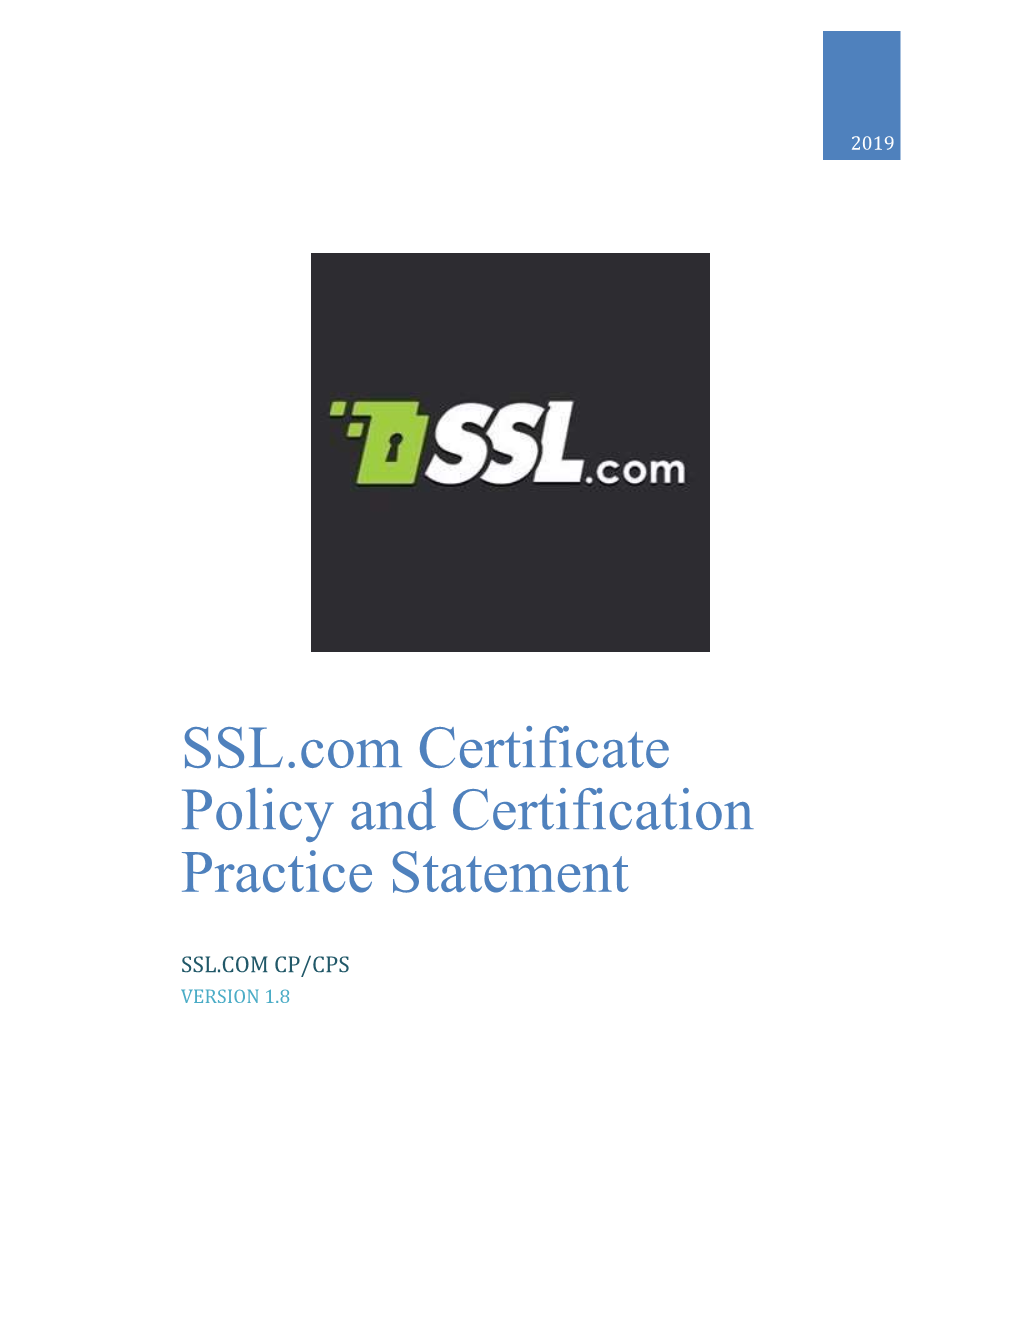 SSL.Com Certificate Policy and Certification Practice Statement